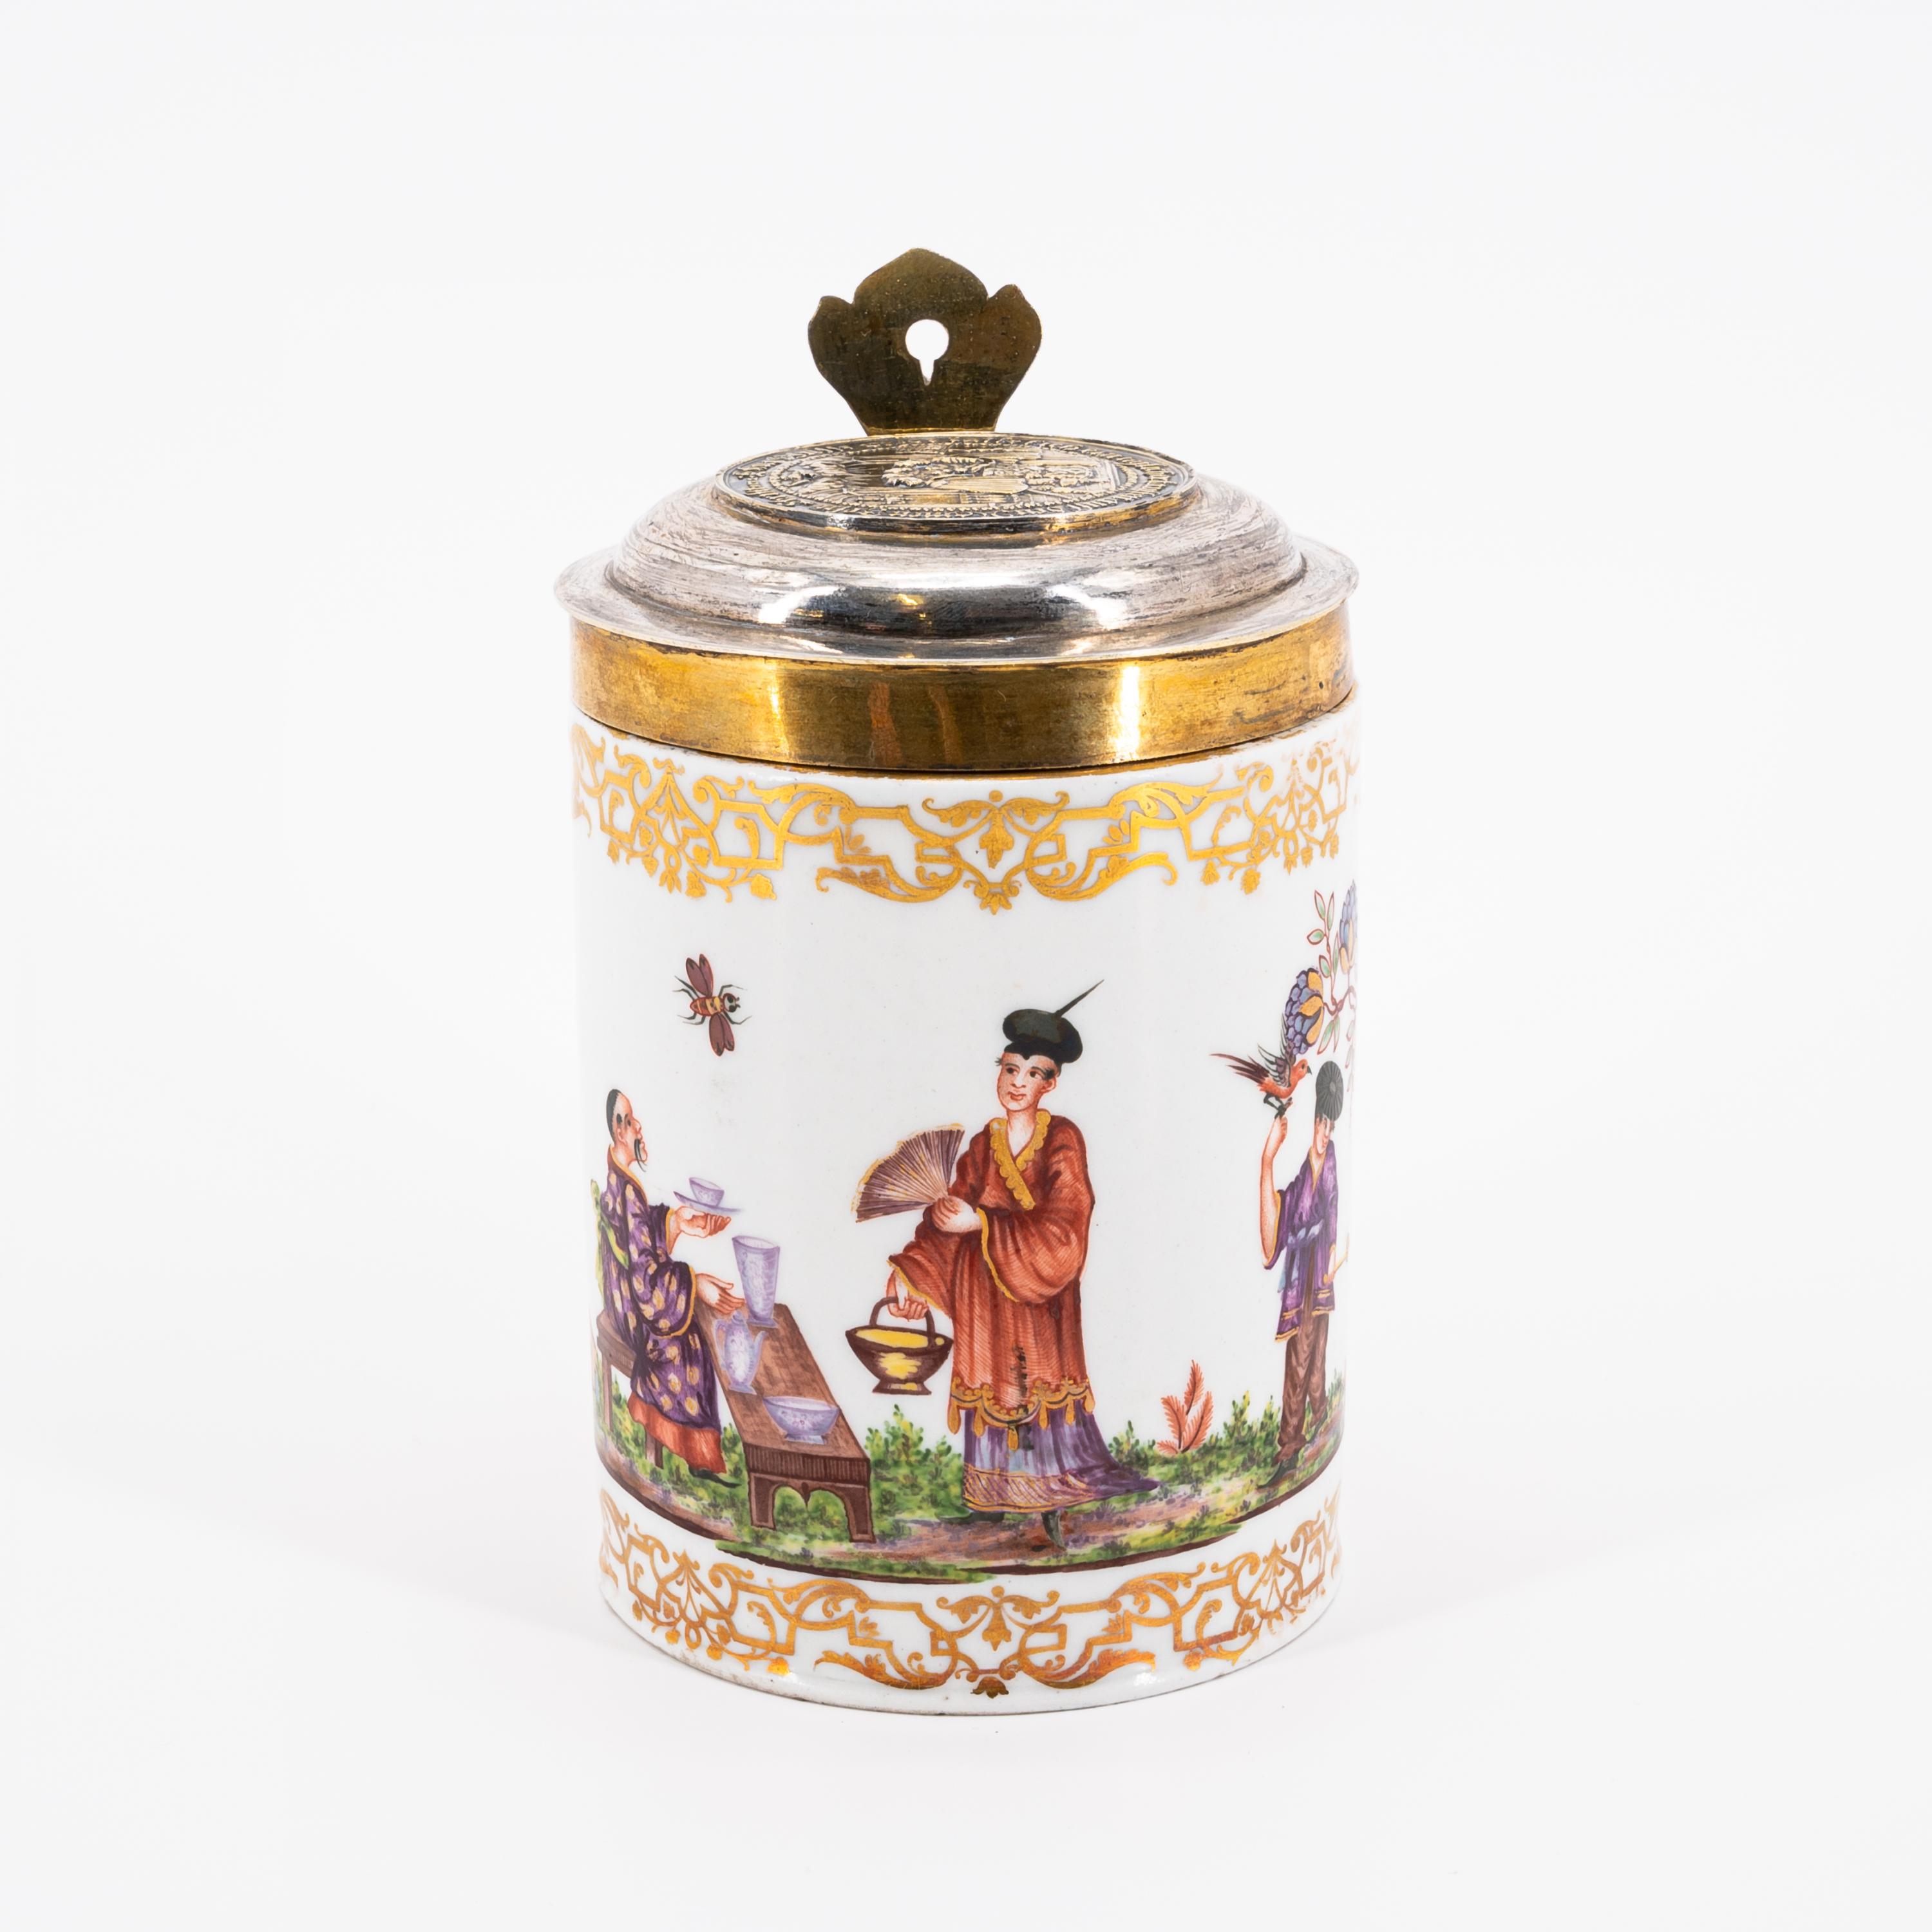 SMALL PORCELAIN 'WALZENKRUG' TANKARD WITH CHINOISERIES - Image 4 of 7